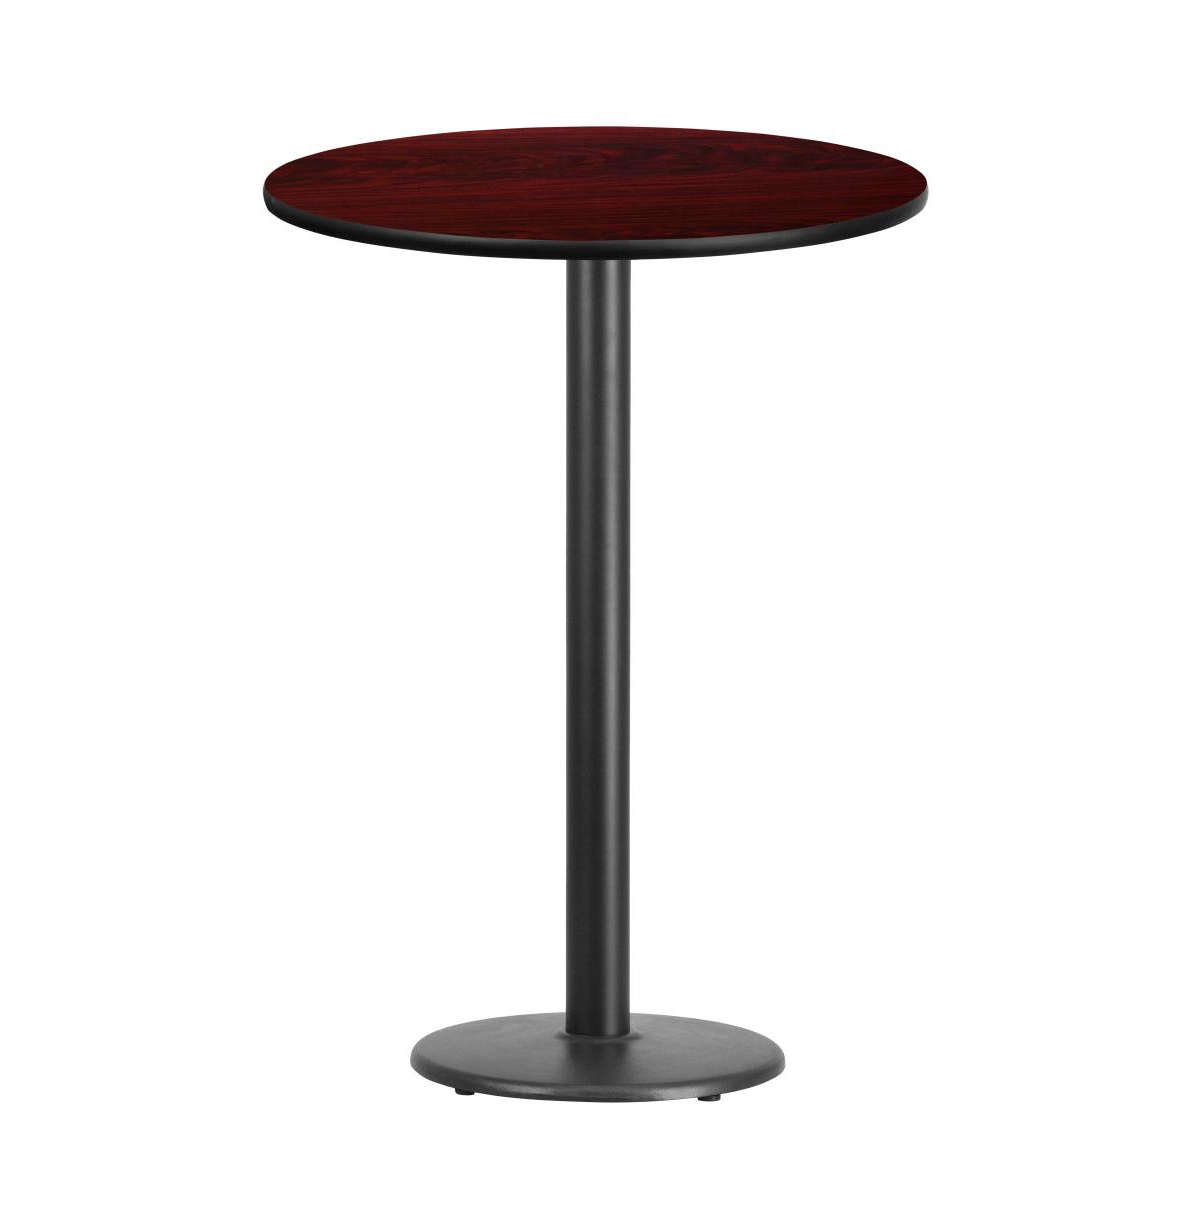 Emma+oliver 30" Round Laminate Table Top With 18" Round Bar Height Table Base In Mahogany